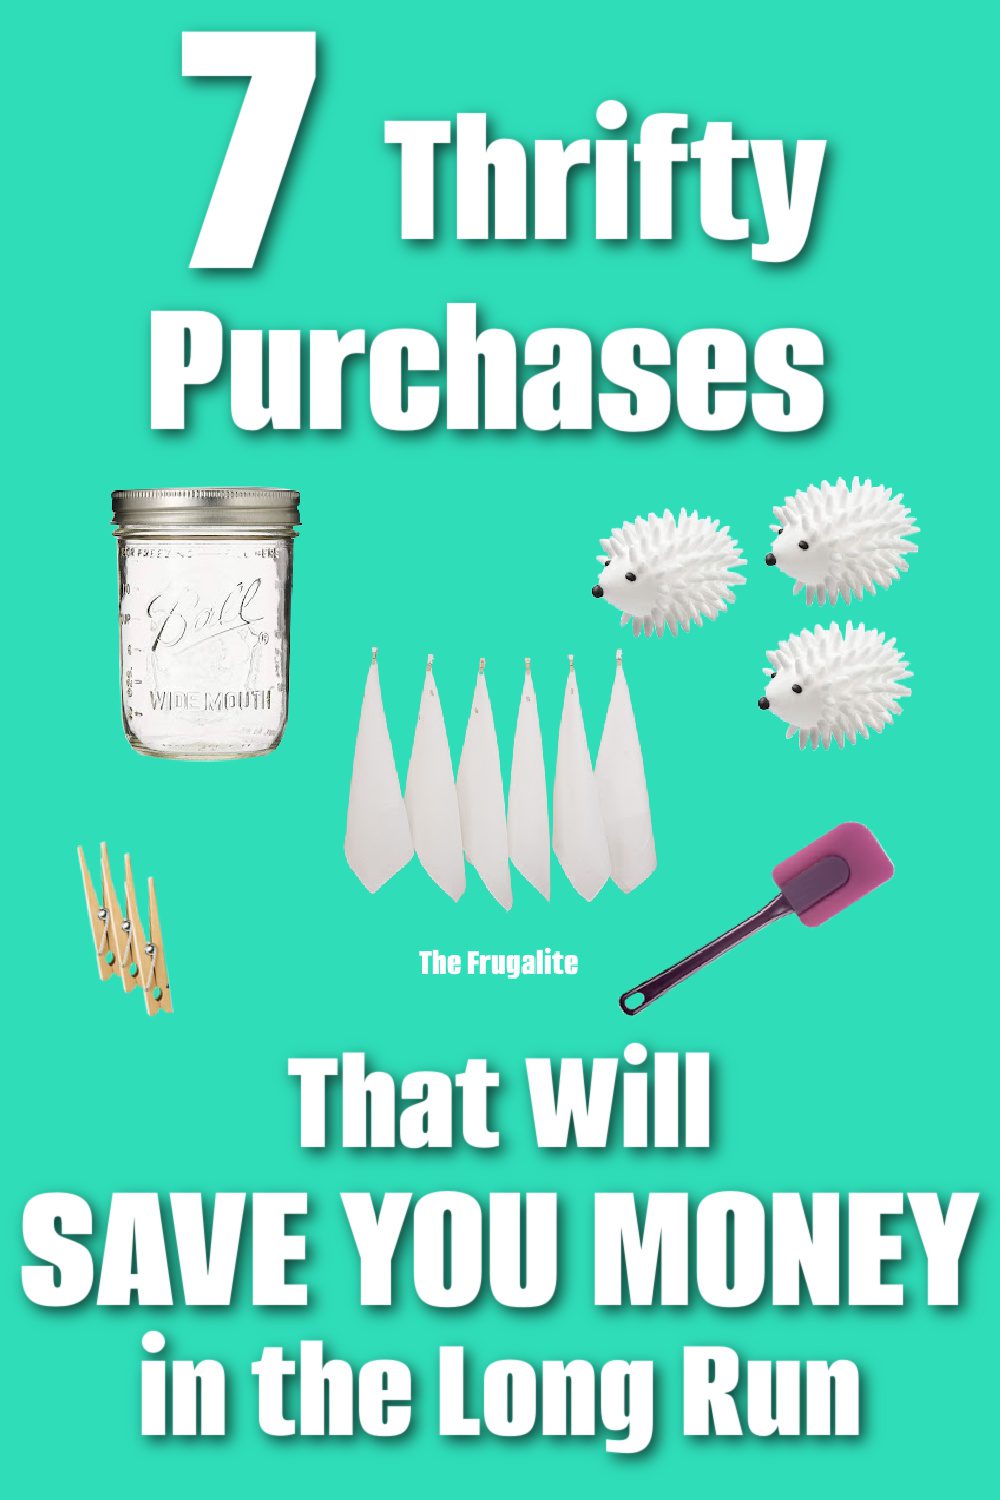 7 Thrifty Purchases That Will Save You Money in the Long Run